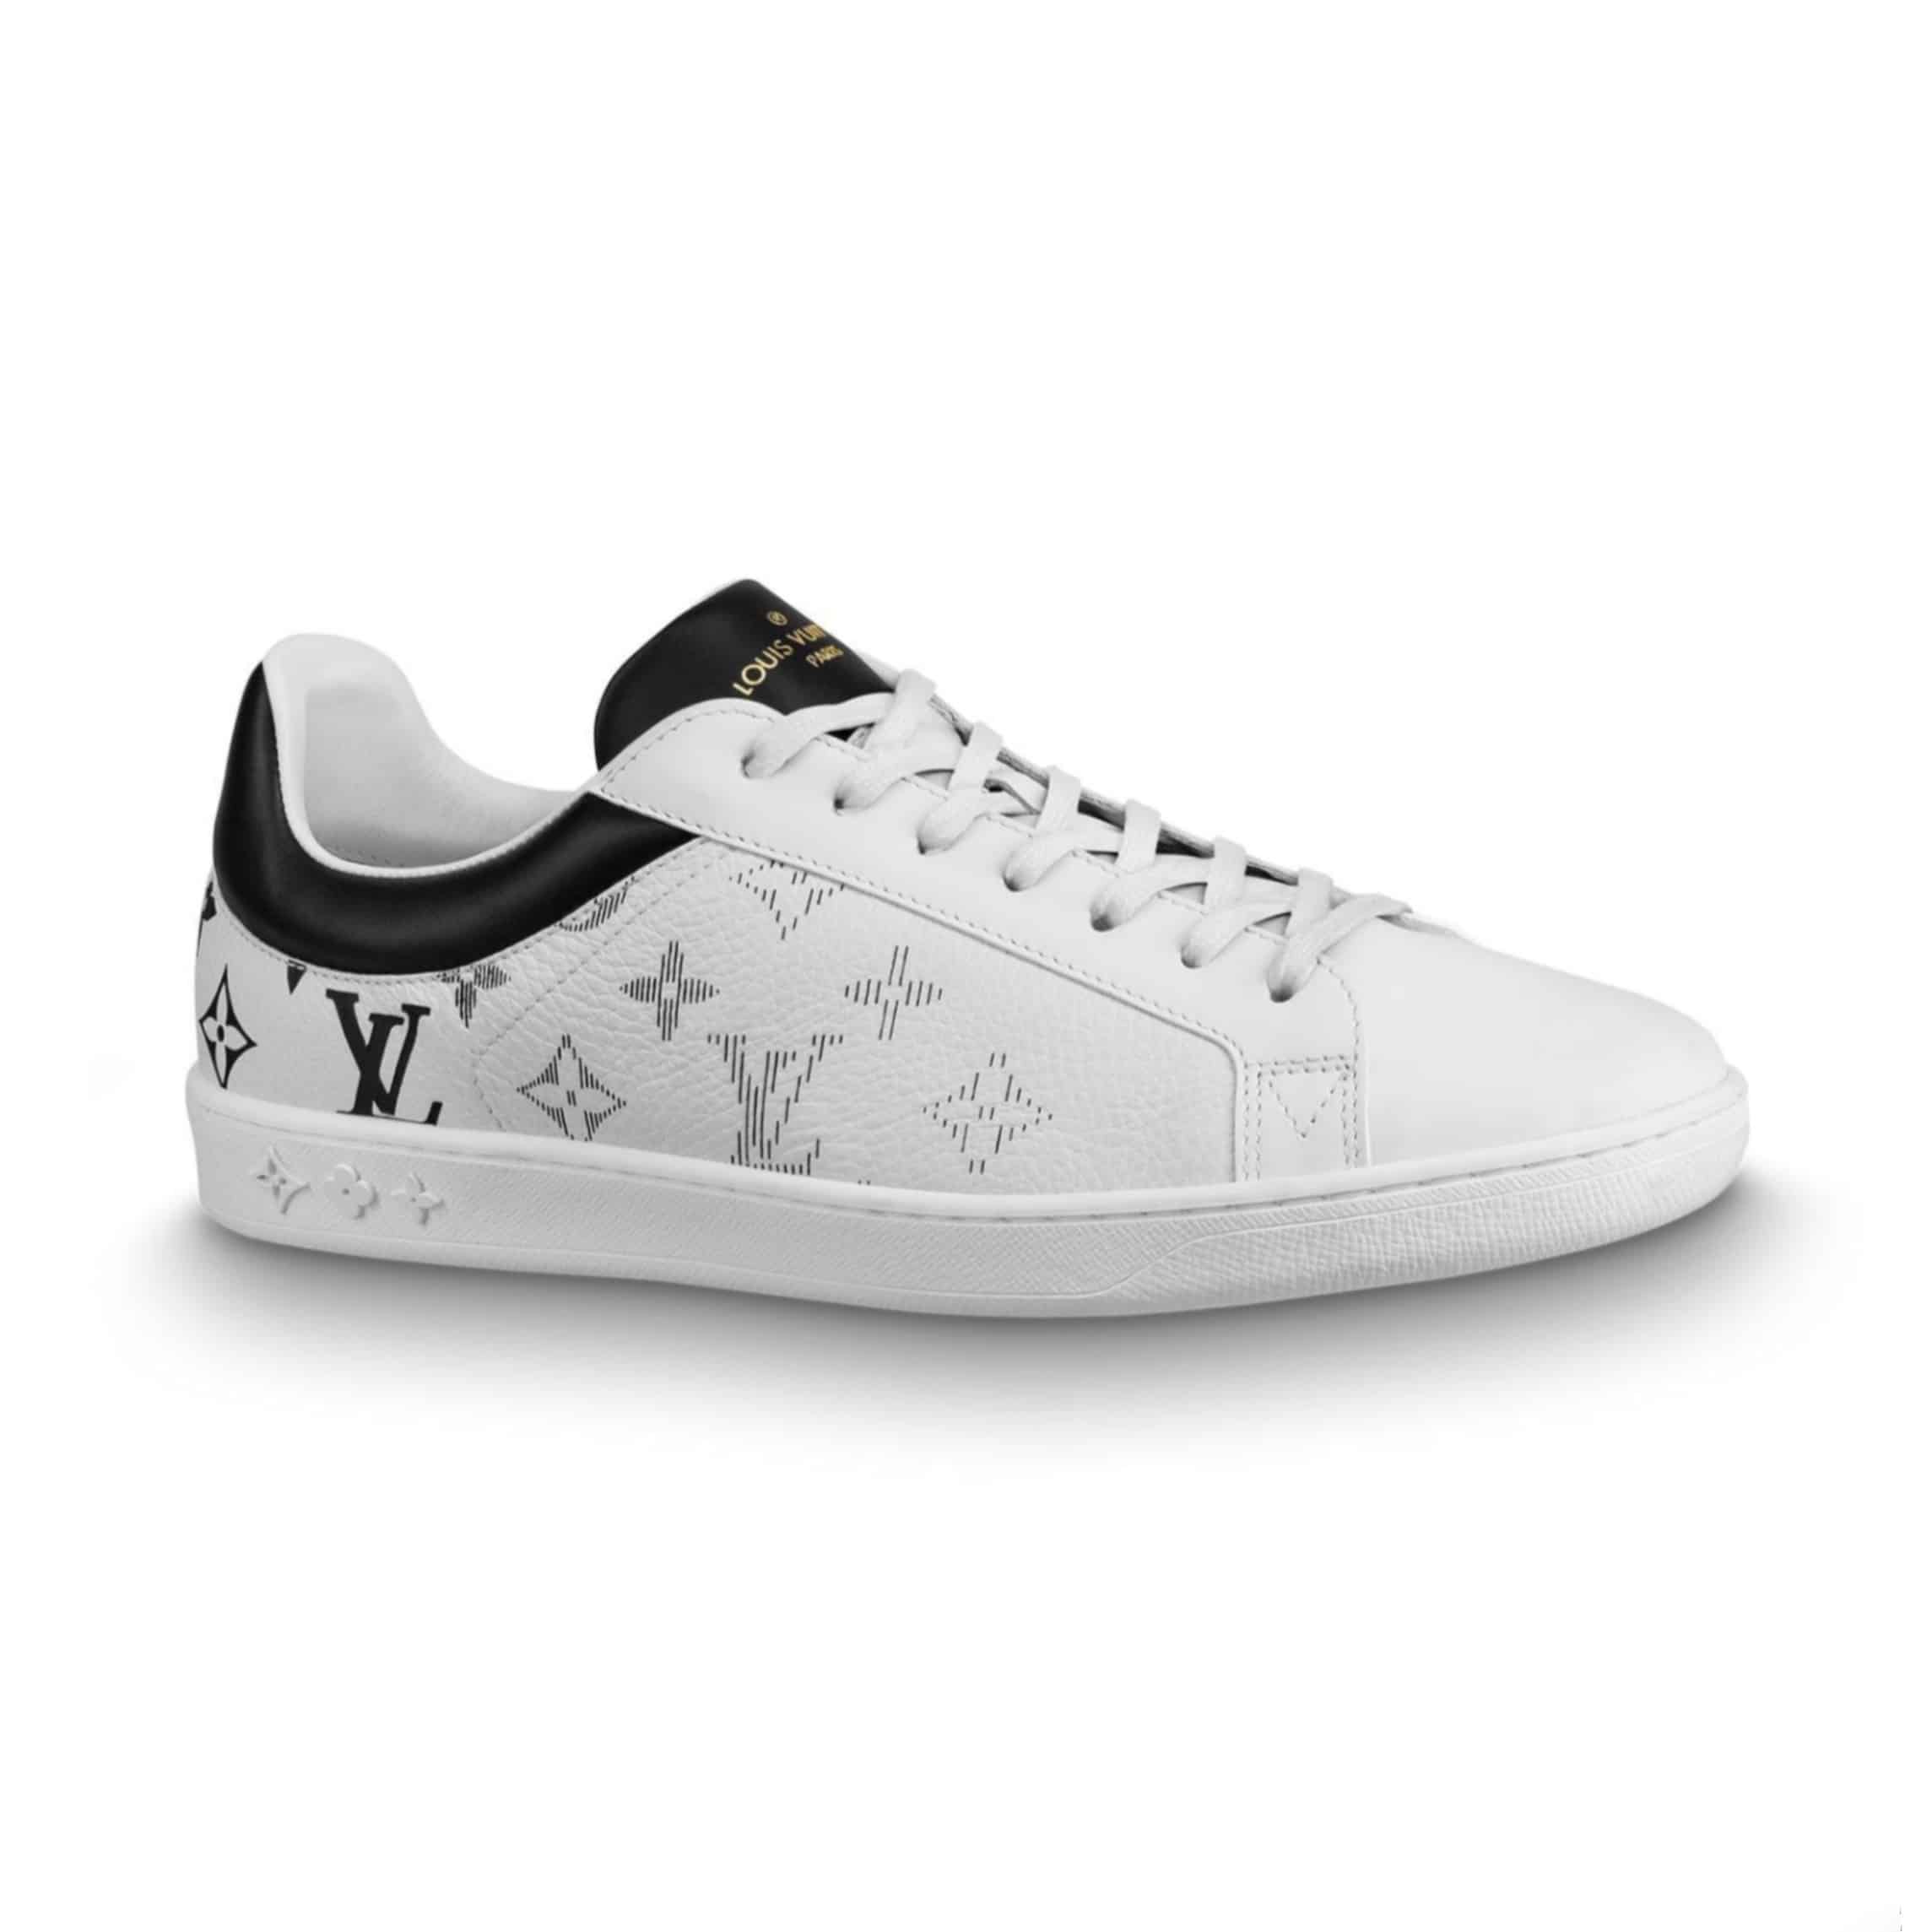 LOUIS VUITTON LUXEMBOURG SNEAKER - LV168 - REPGOD.ORG/IS - Trusted Replica  Products - ReplicaGods - REPGODS.ORG